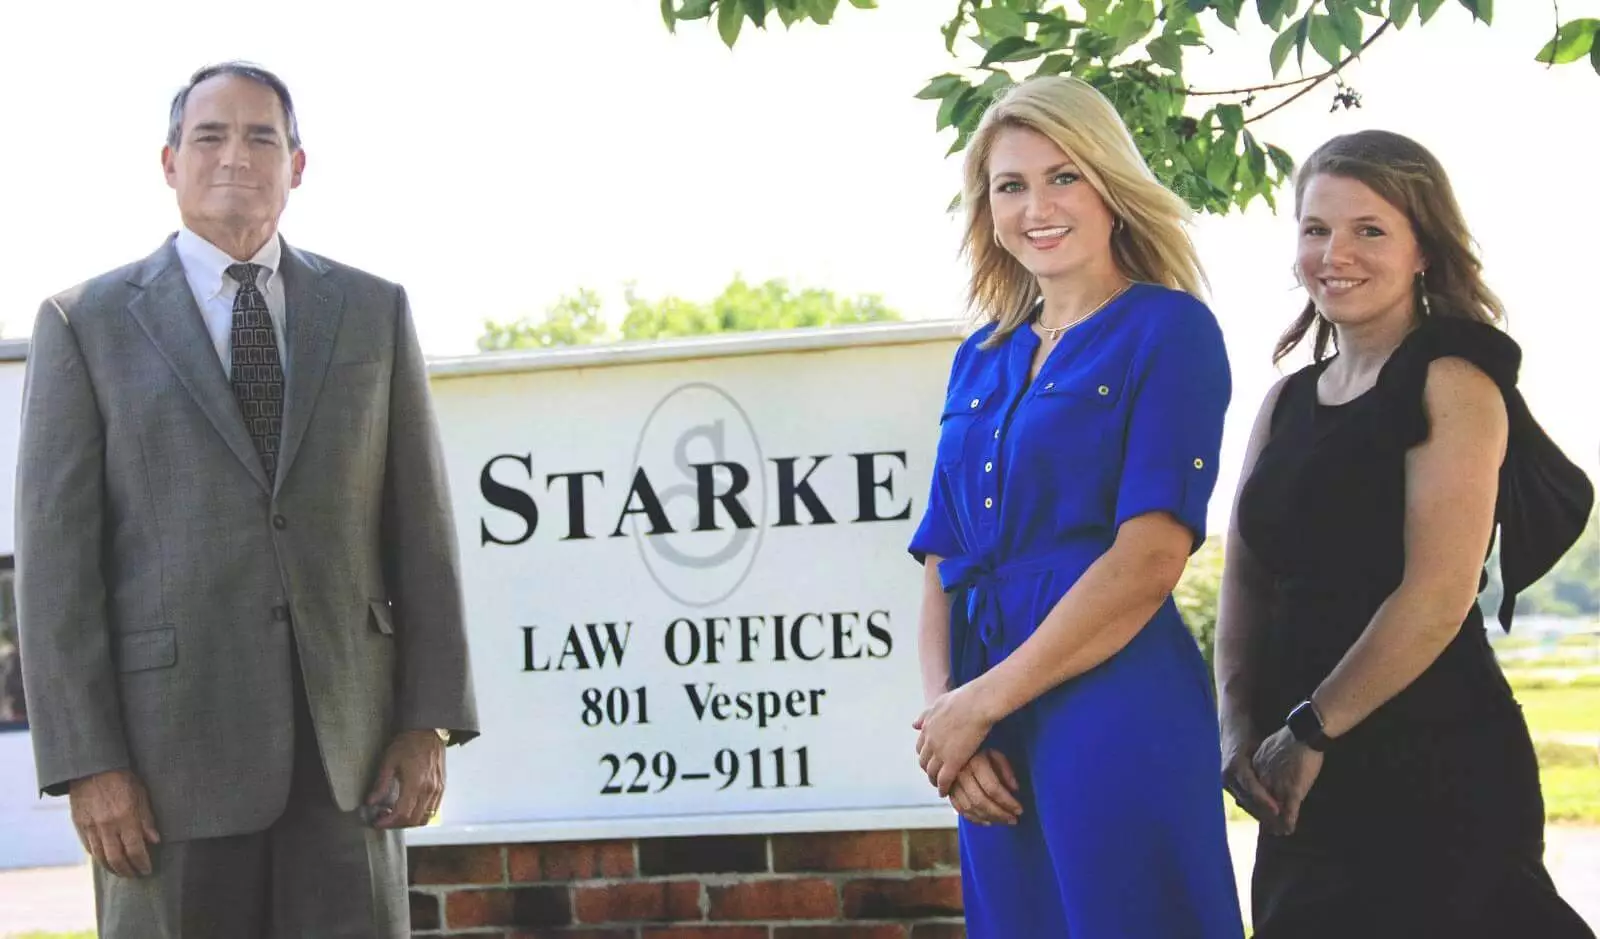 Starke Law Offices staff in front of their office building